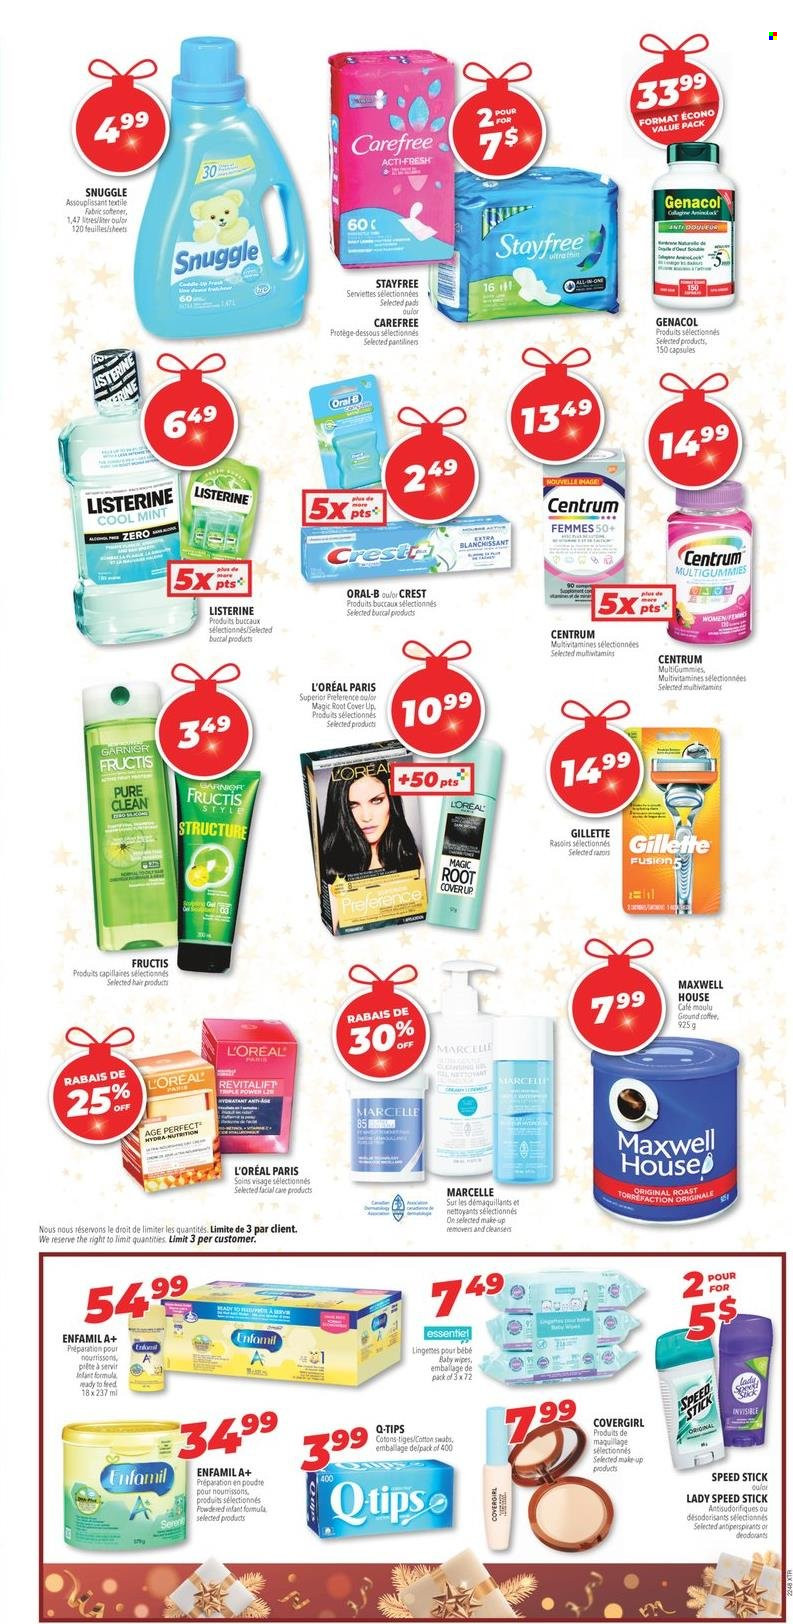 thumbnail - Familiprix Extra Flyer - November 24, 2022 - November 30, 2022 - Sales products - Maxwell House, coffee, wipes, baby wipes, Snuggle, fabric softener, Crest, Stayfree, pantiliners, Carefree, Gillette, L’Oréal, Fructis, Speed Stick, makeup, multivitamin, Centrum, Garnier, Listerine, Oreo, Oral-B, deodorant. Page 22.